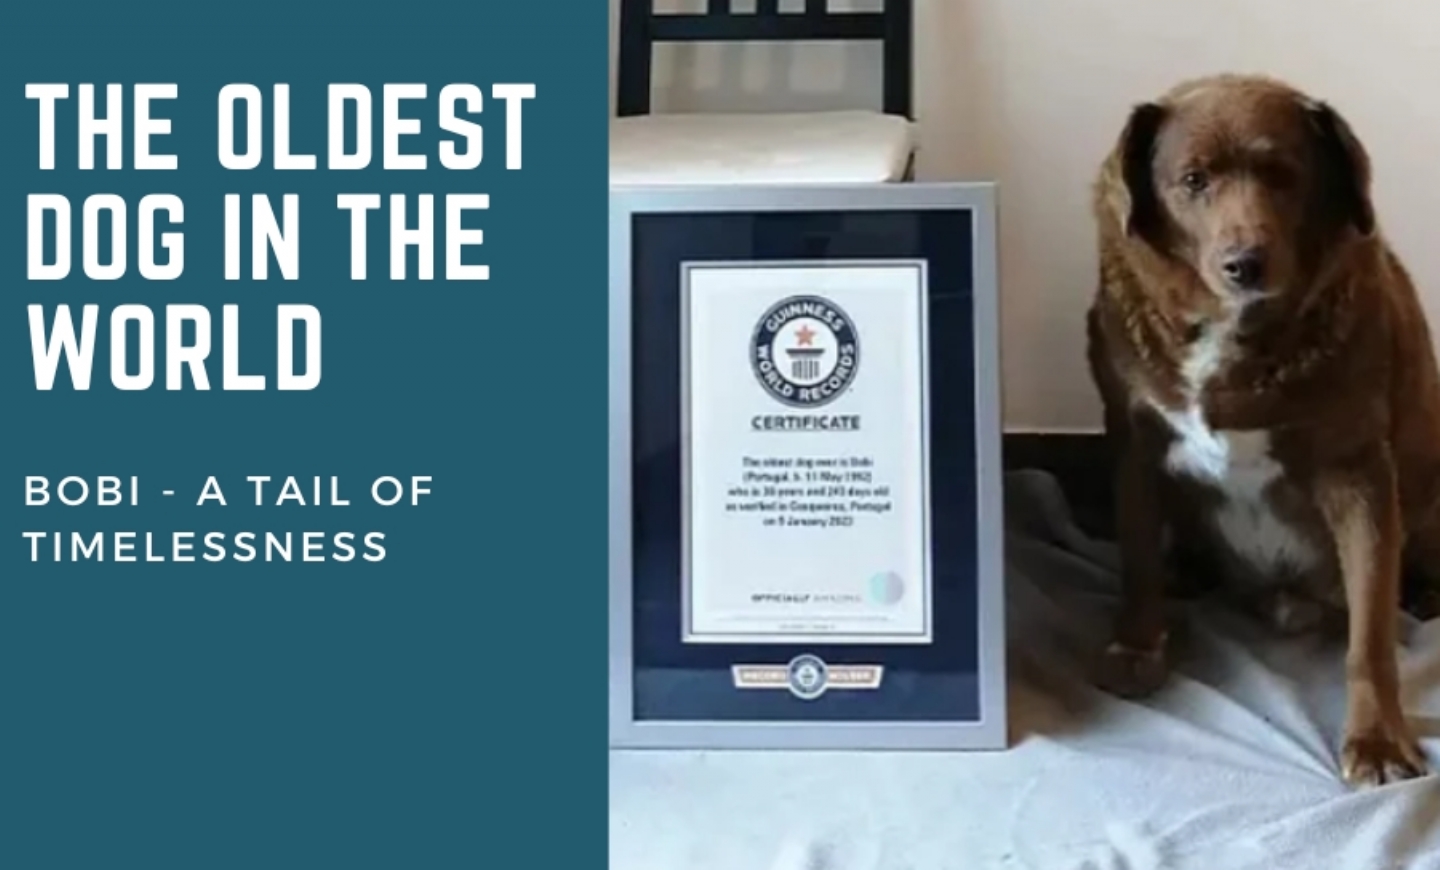 The oldest dog in the world